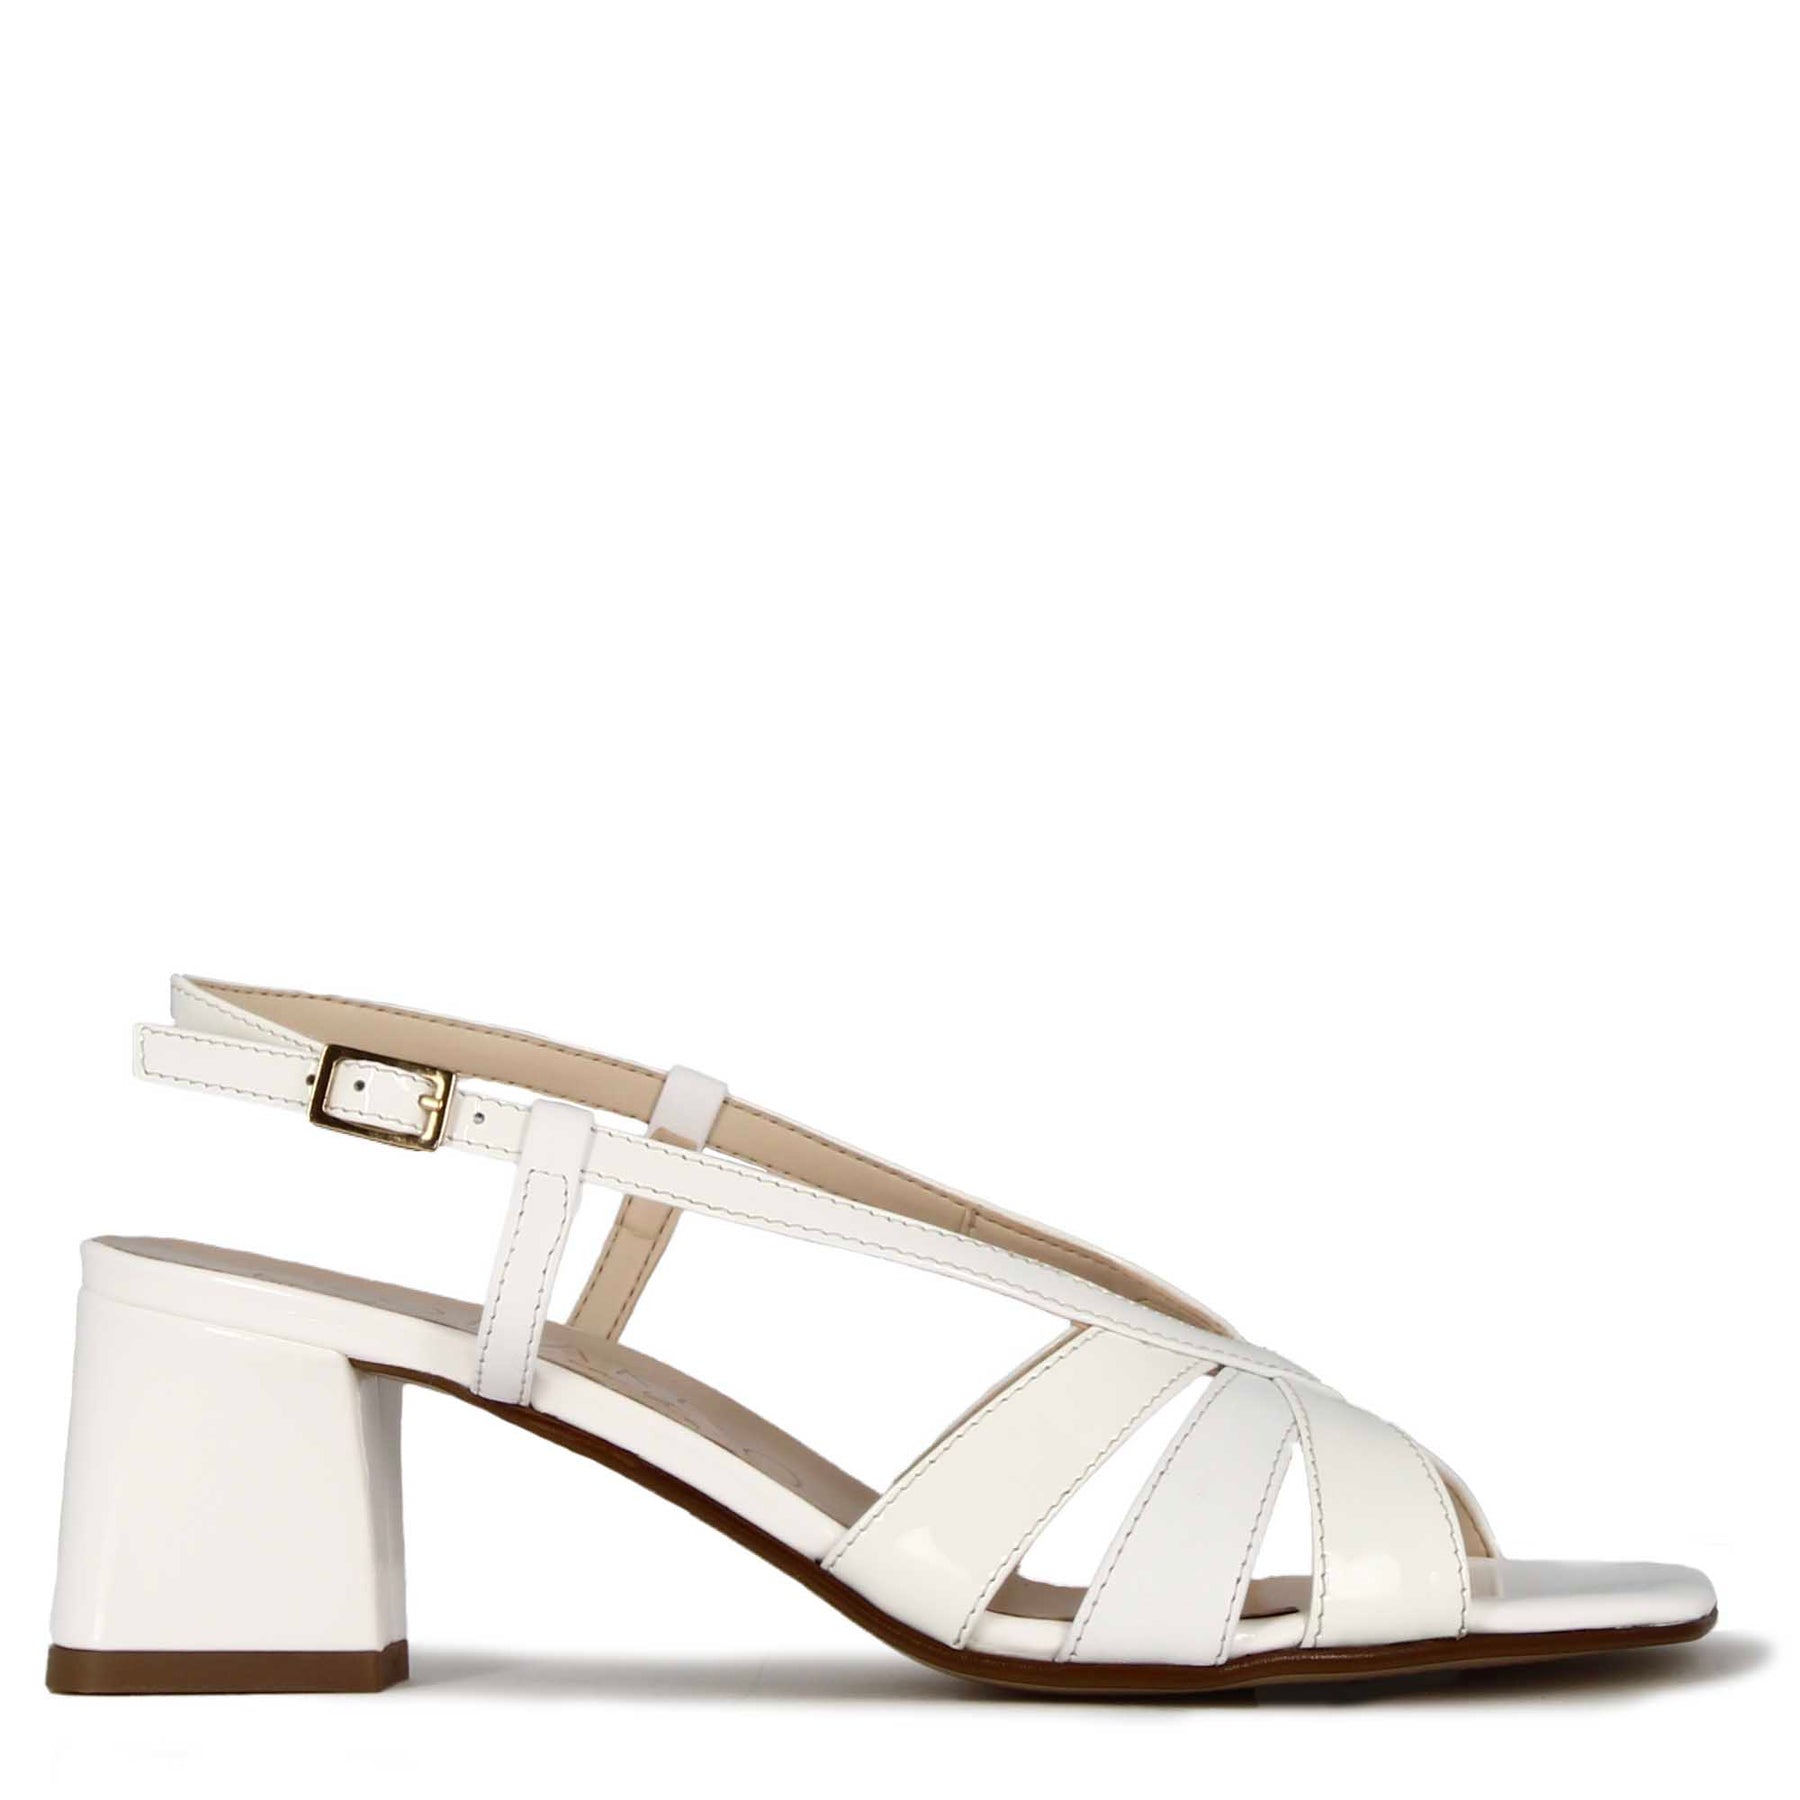 Classic women's sandal in multi-band patent leather